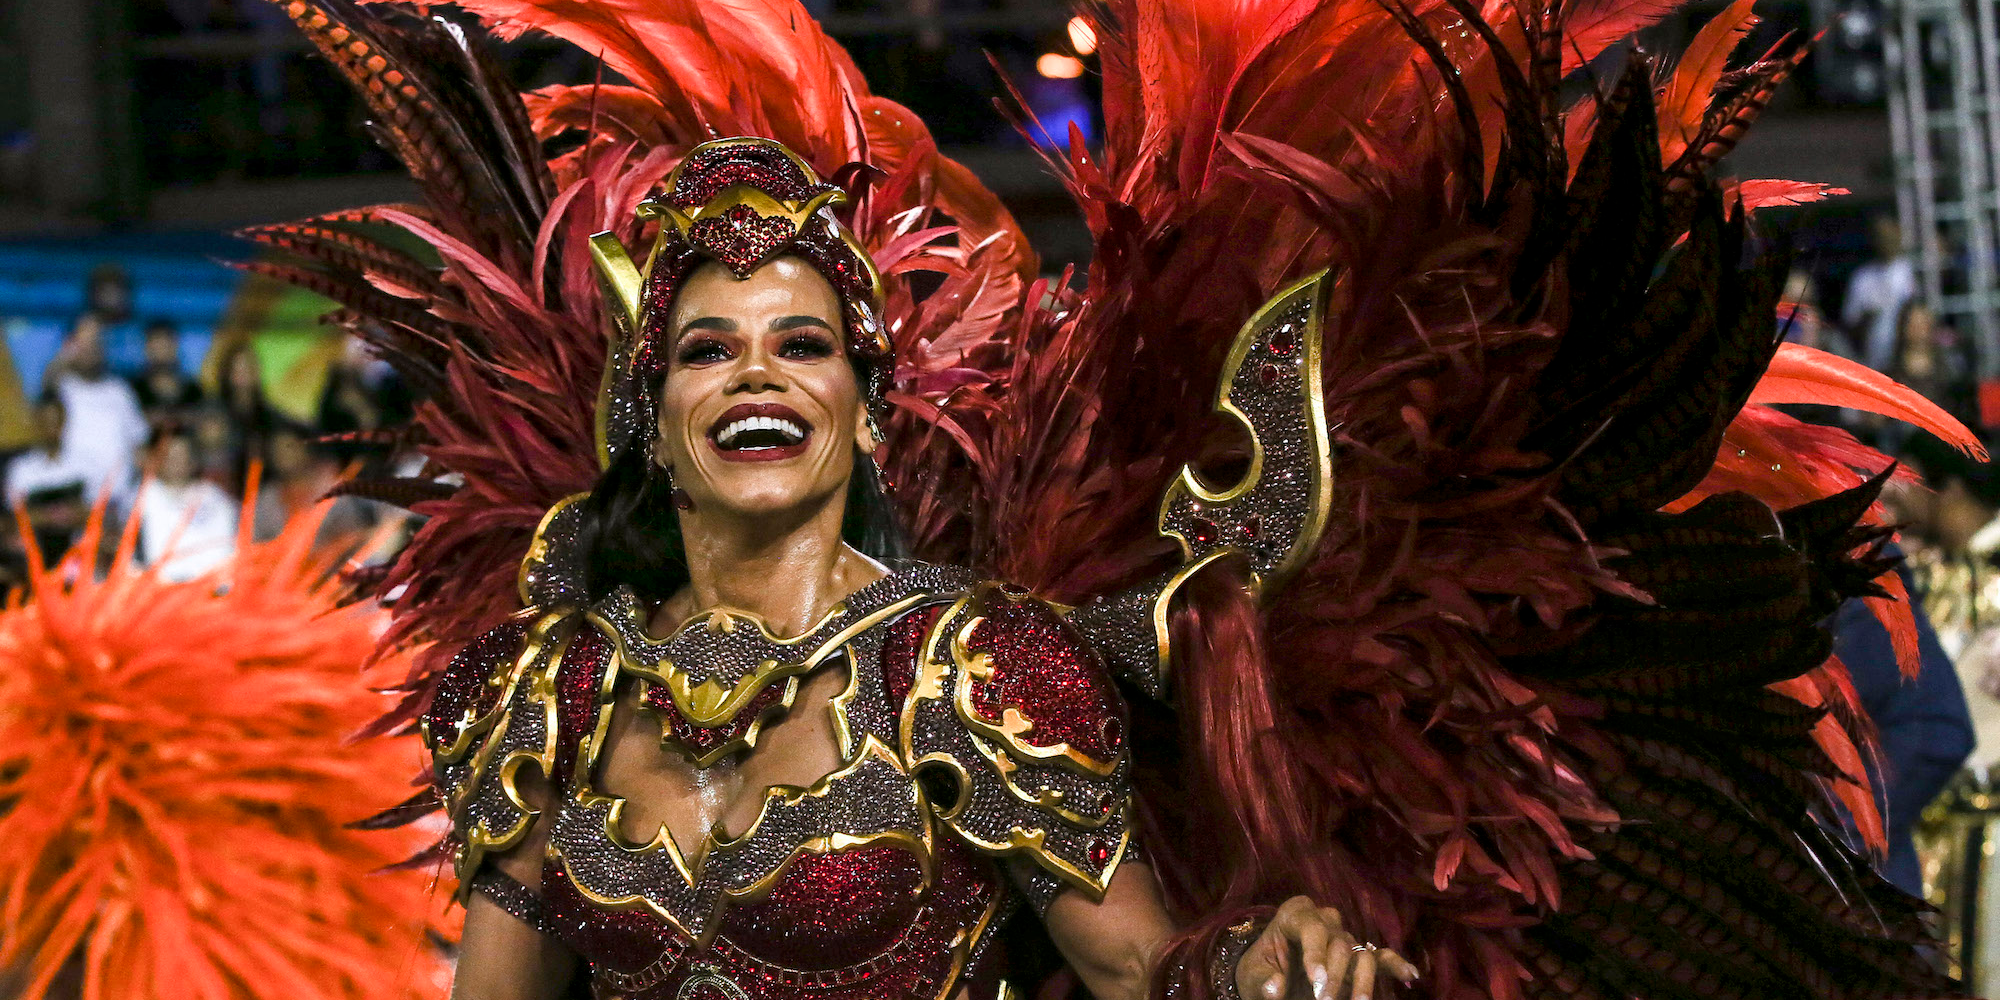 Dazzling photo show how Carnival is lighting up the streets of Brazil in 2020